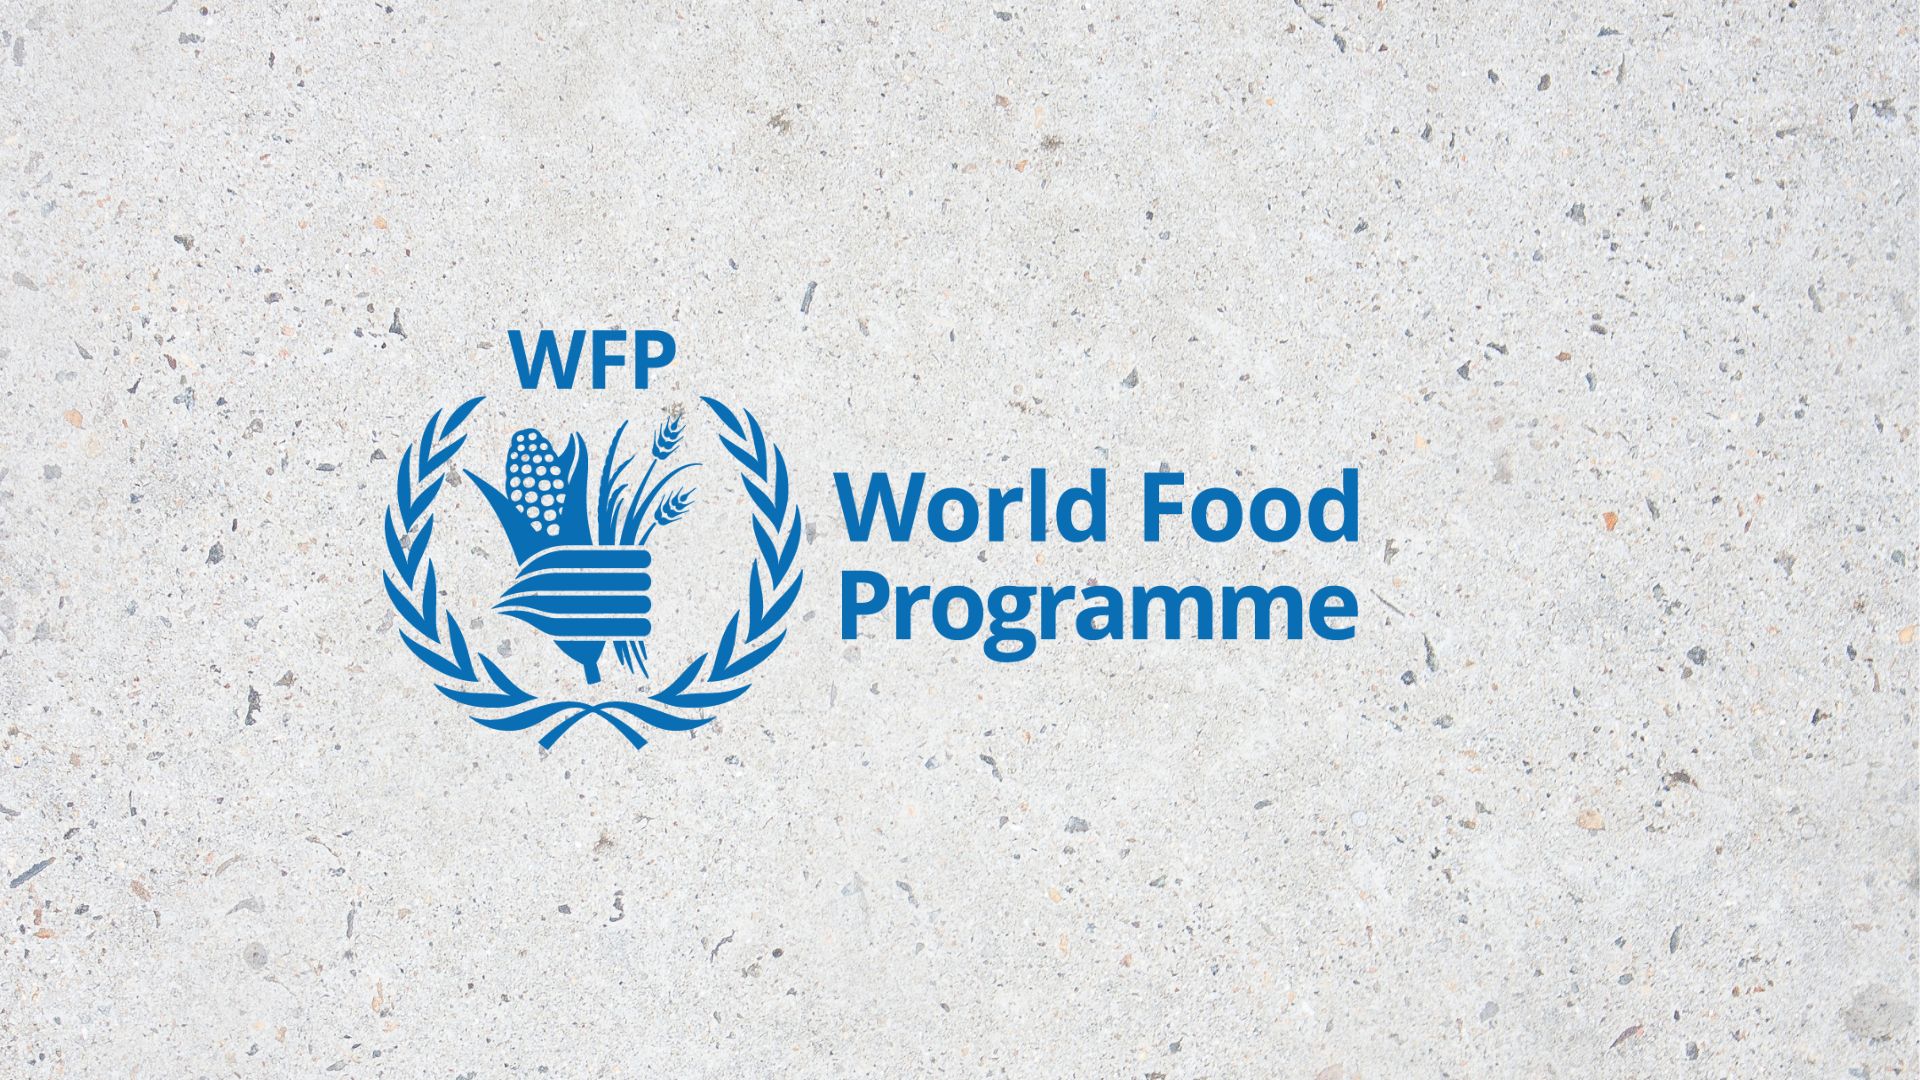 Taliban Rule in Afghanistan Threatens Malnutrition Crisis for 3 Million Children: WFP